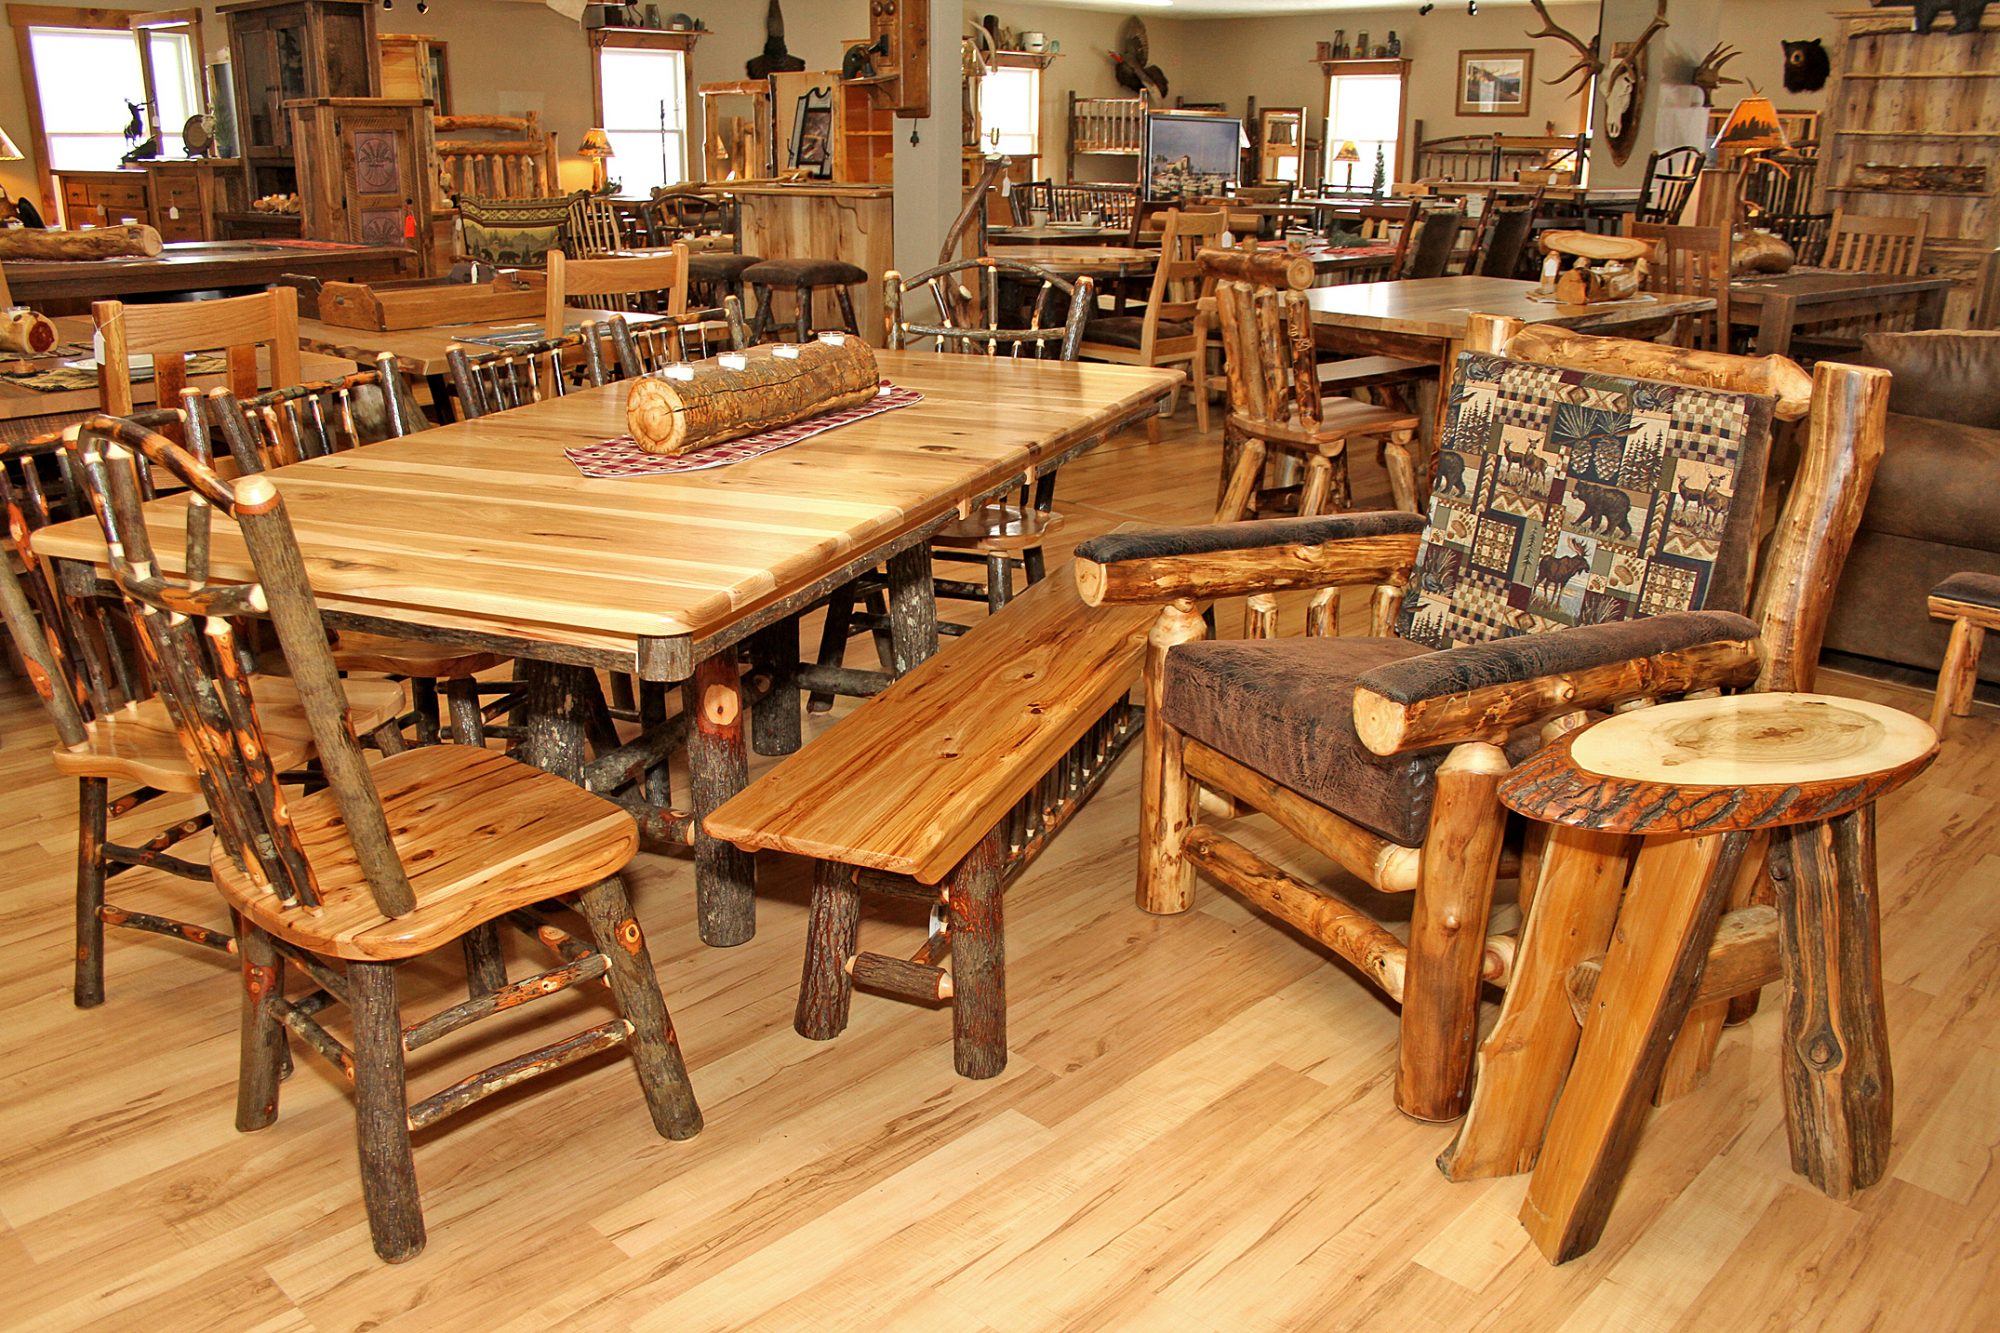 Miller's Rustic Furniture | Ohio's Amish Country